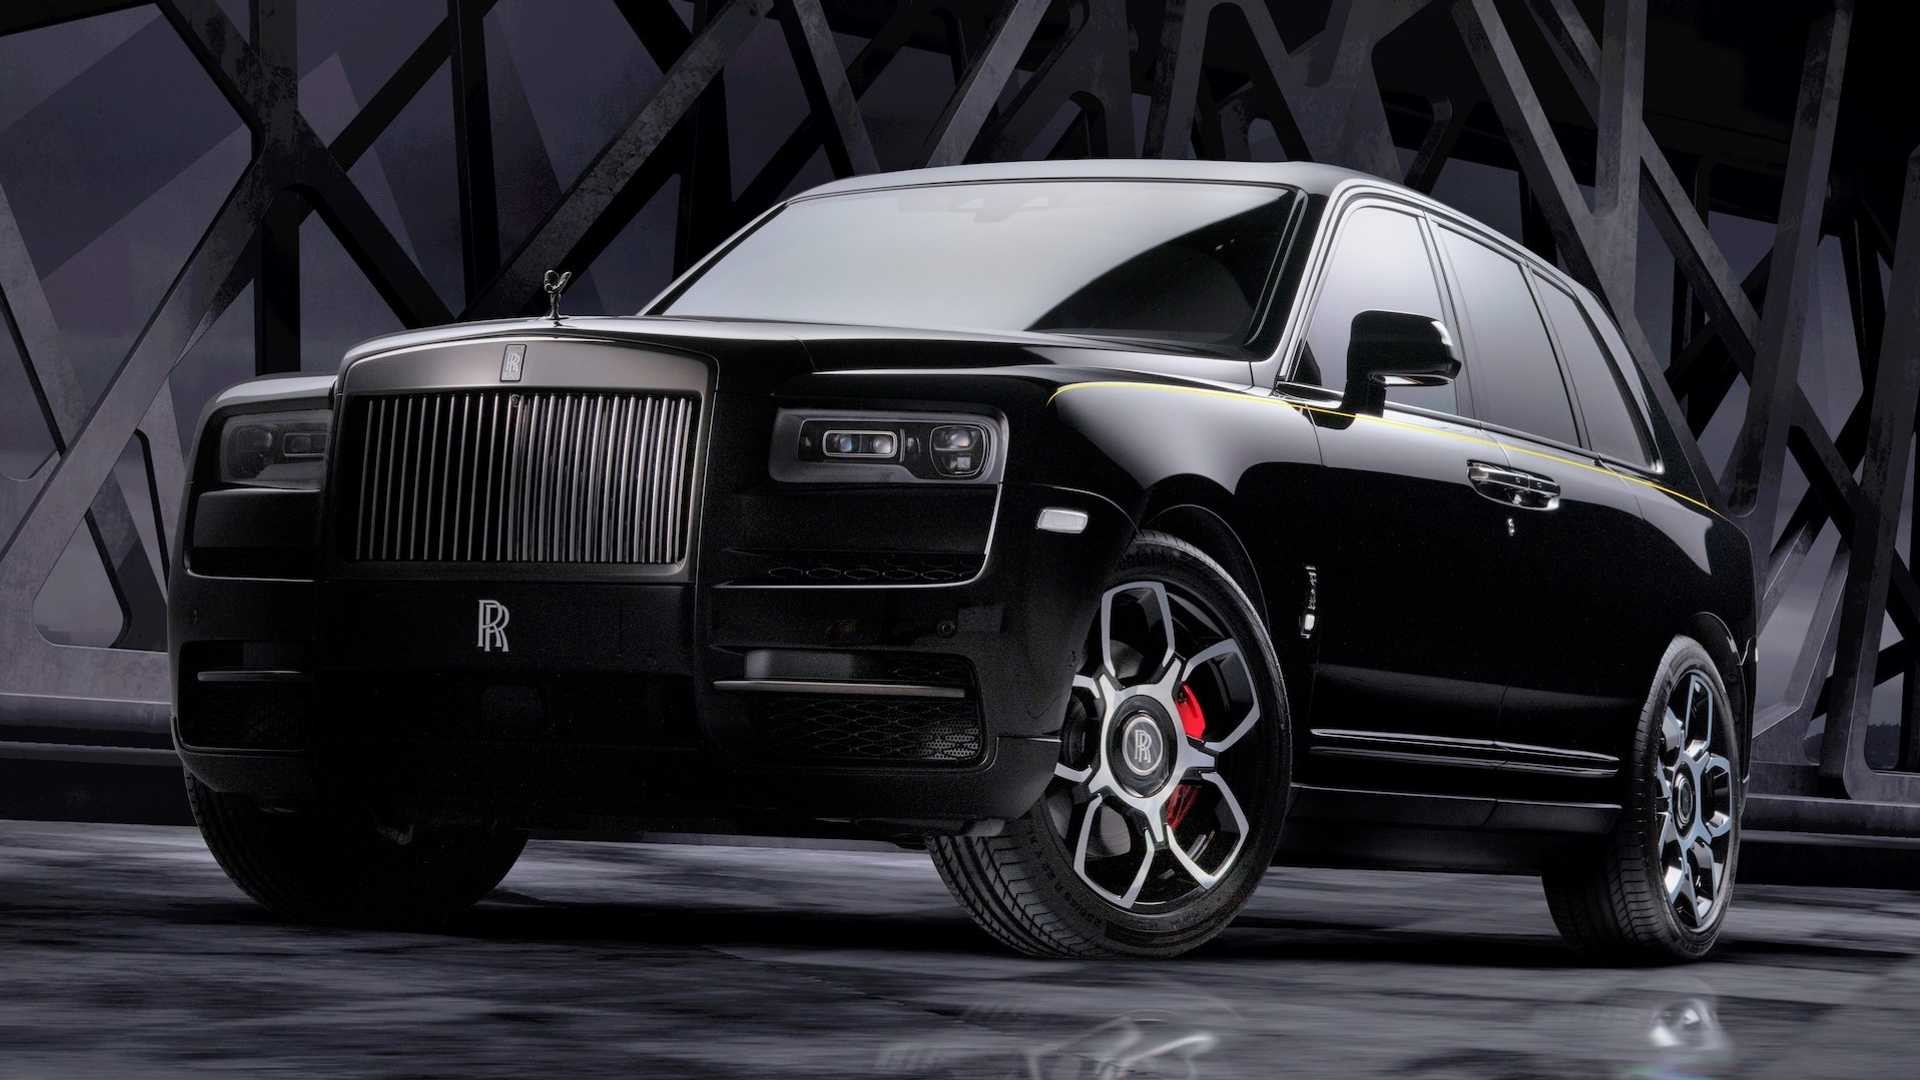 2019 Rolls Royce Cullinan  INTERIOR  The Worlds Most Expensive SUV    YouTube